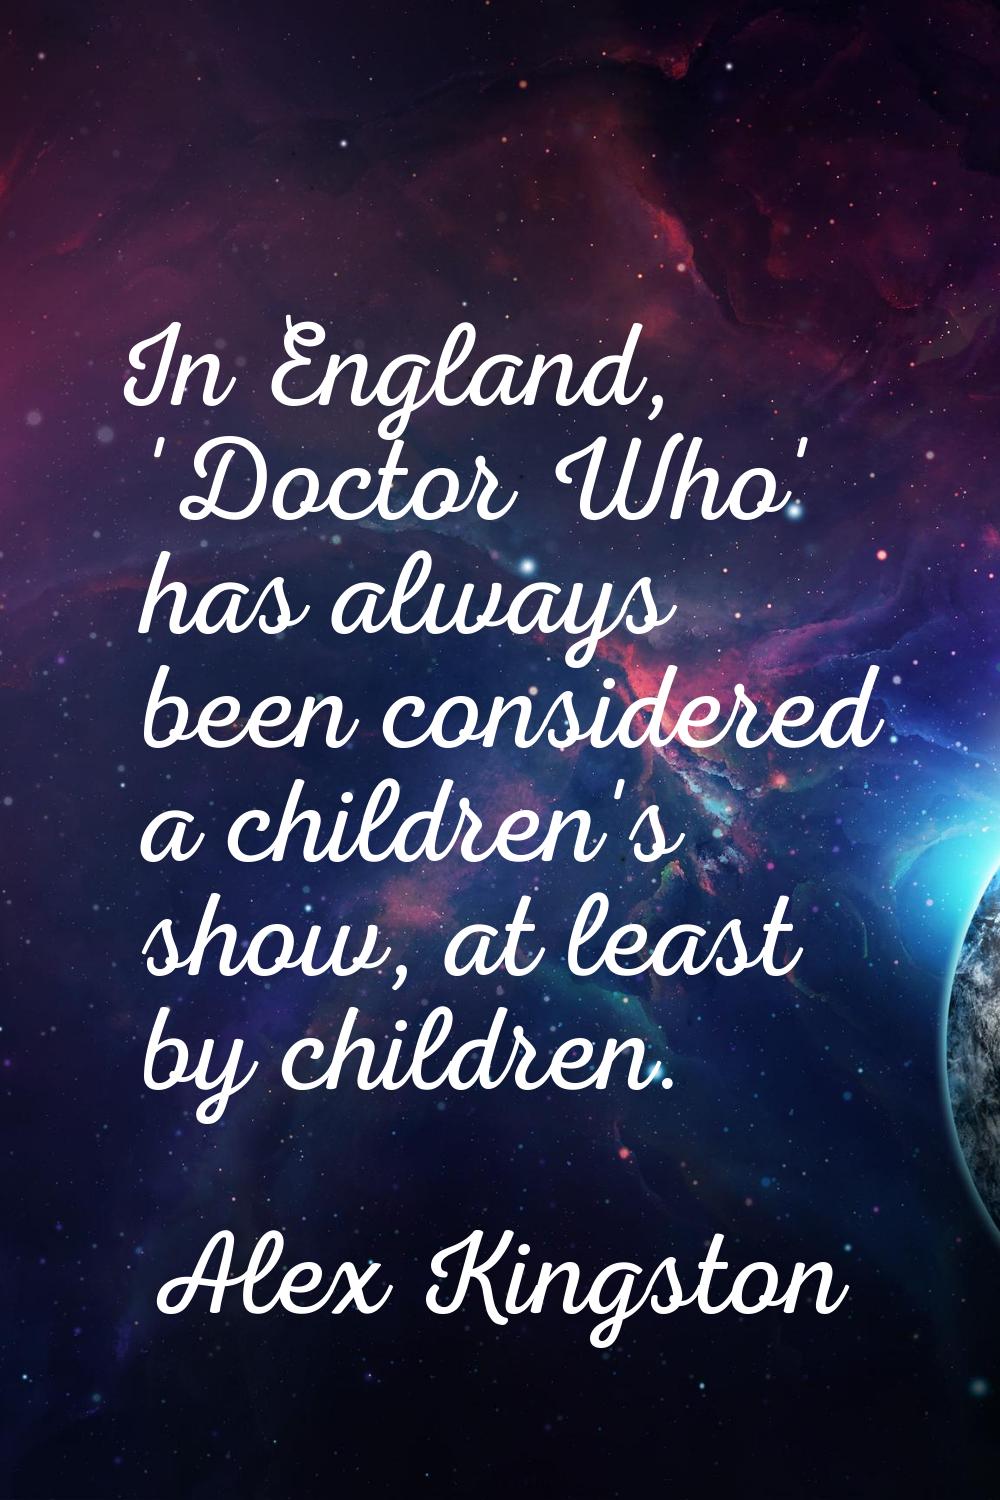 In England, 'Doctor Who' has always been considered a children's show, at least by children.